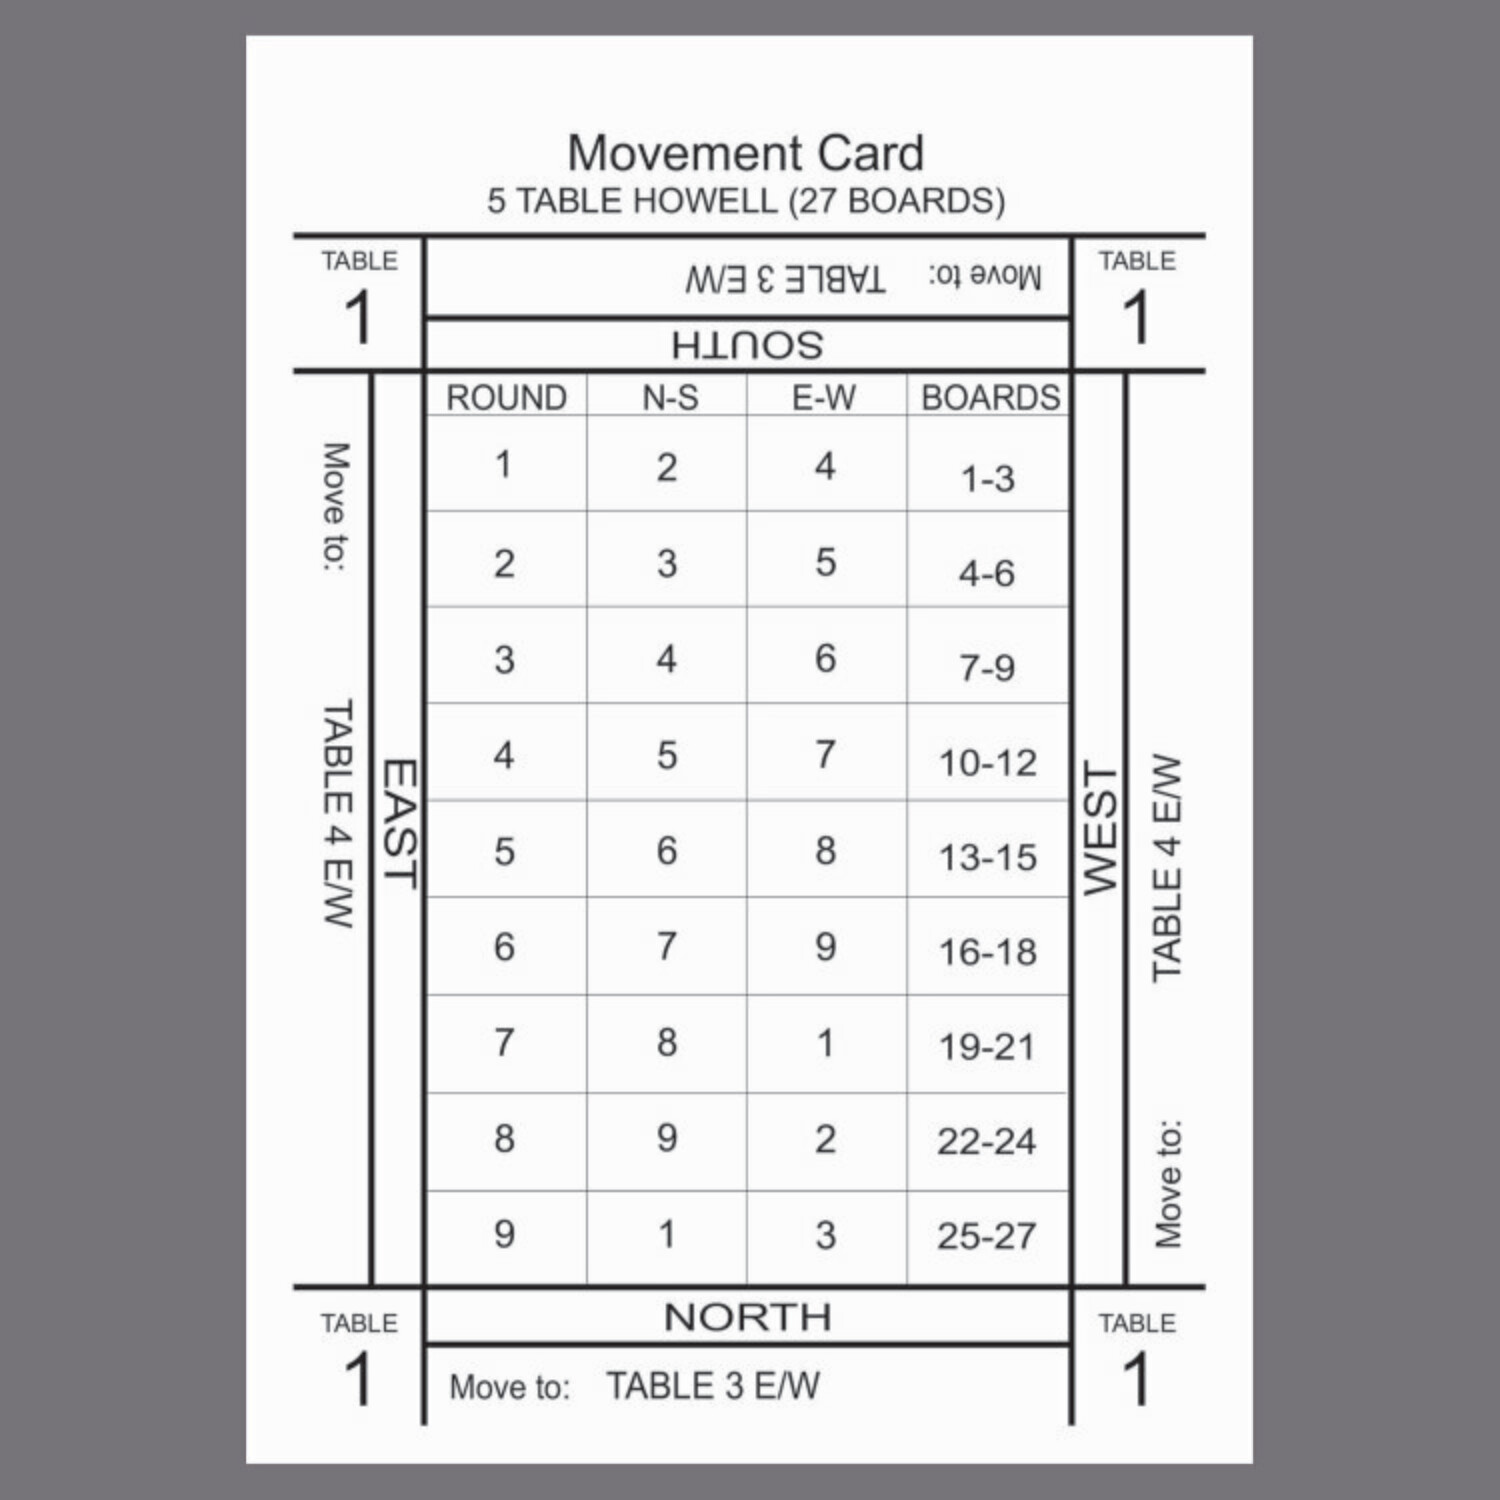 Howell Movement Cards (5 table/27 boards)